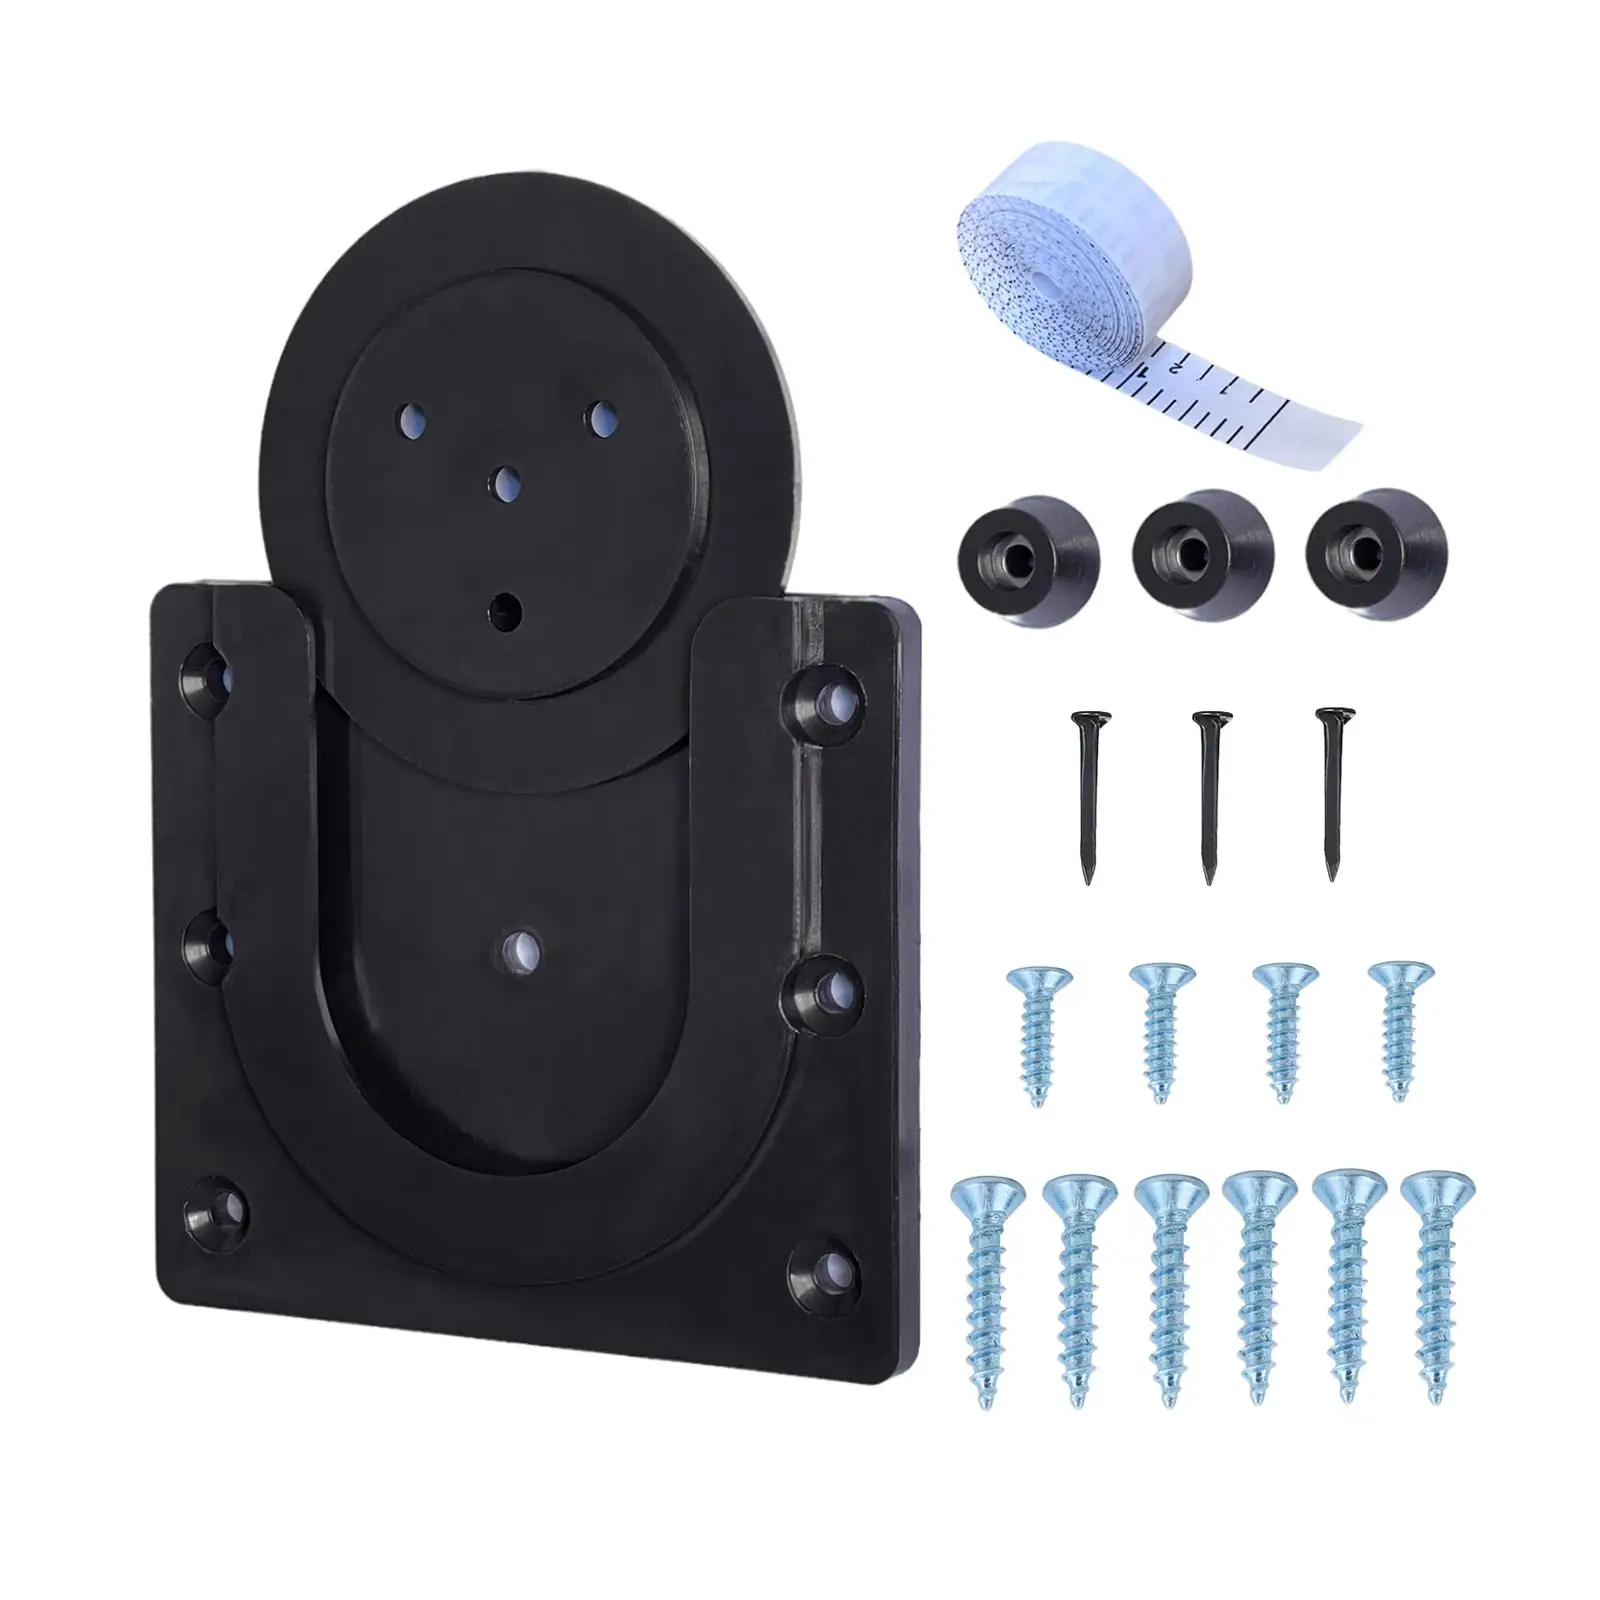 Dartboard Mounting Bracket Accessories Stable Holder Portable Wall Mounting